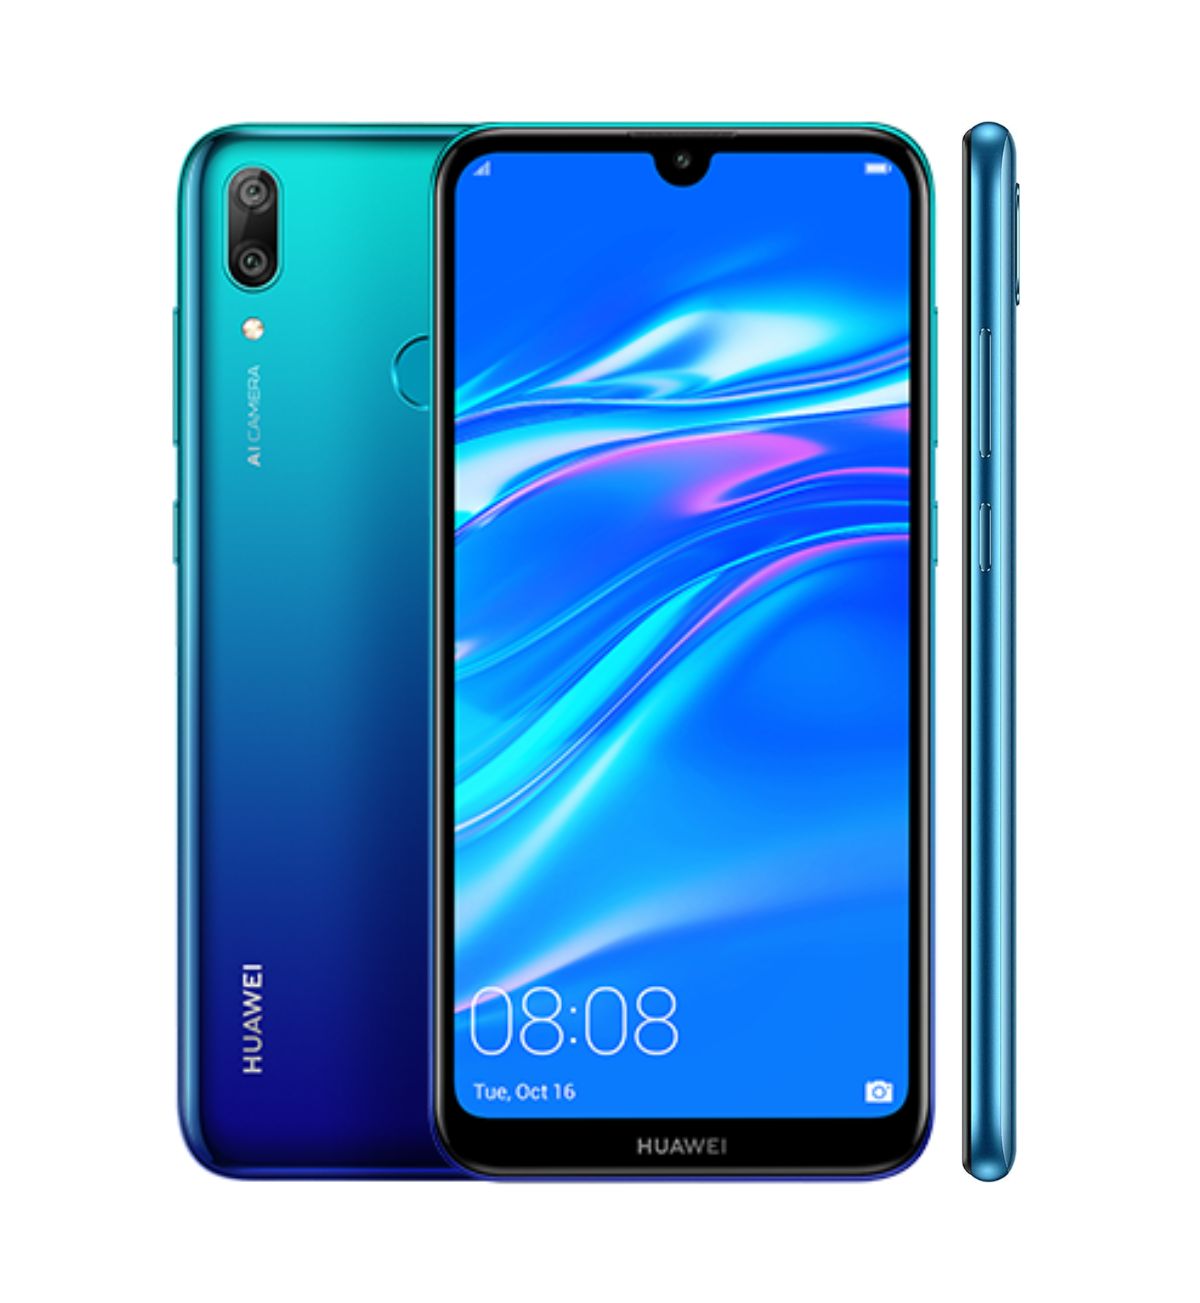 A close-up image of the sleek Huawei Y6 2019 smartphone in a stylish colour, held comfortably in a hand. The 6.09-inch HD display is vibrant and showcases a crisp image.